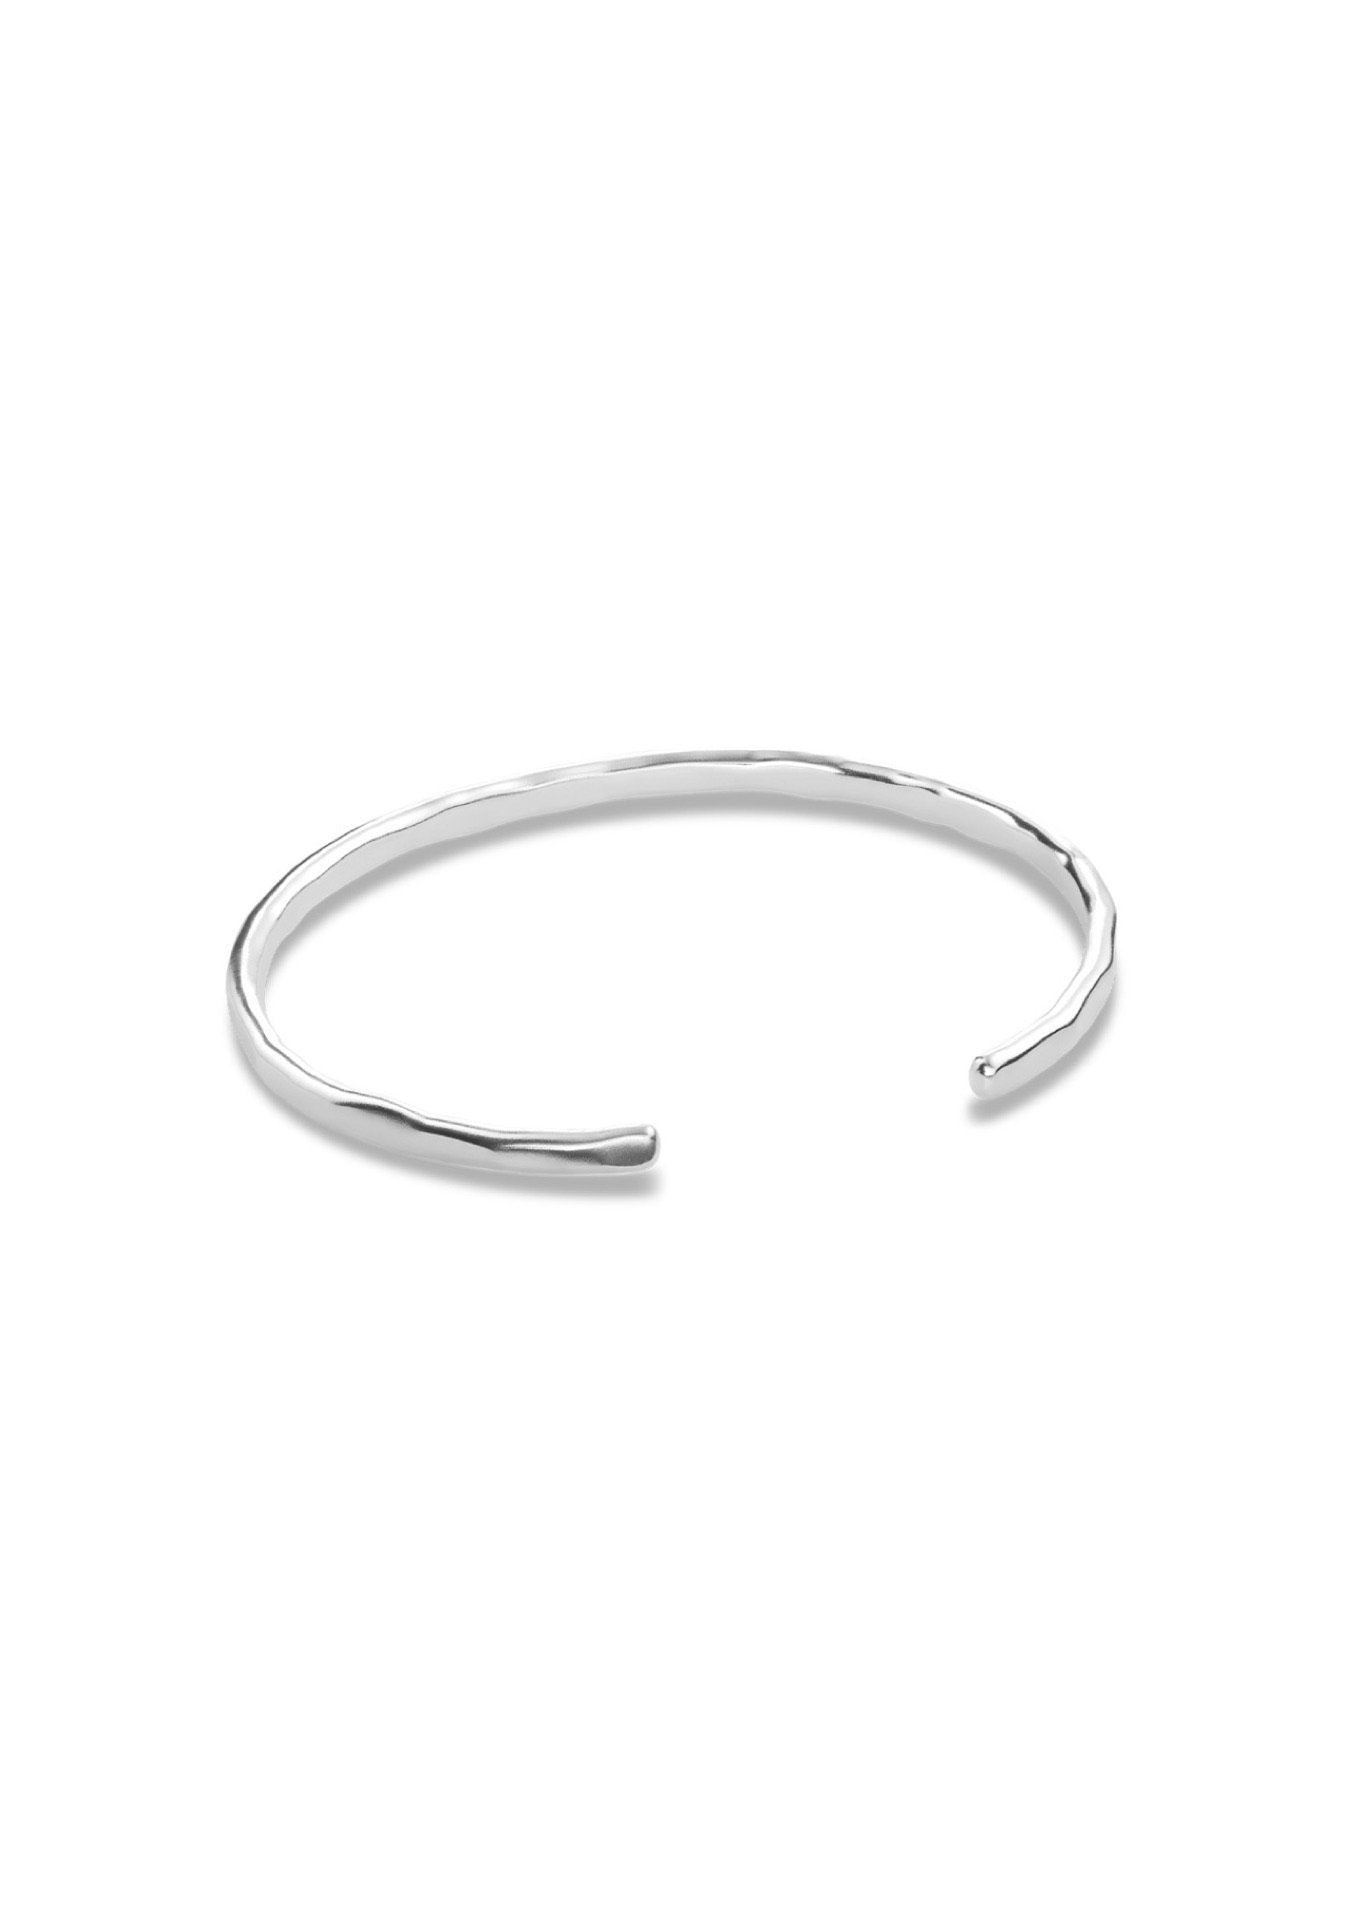 NO MORE accessories Hammered Bracelet in sterling silver